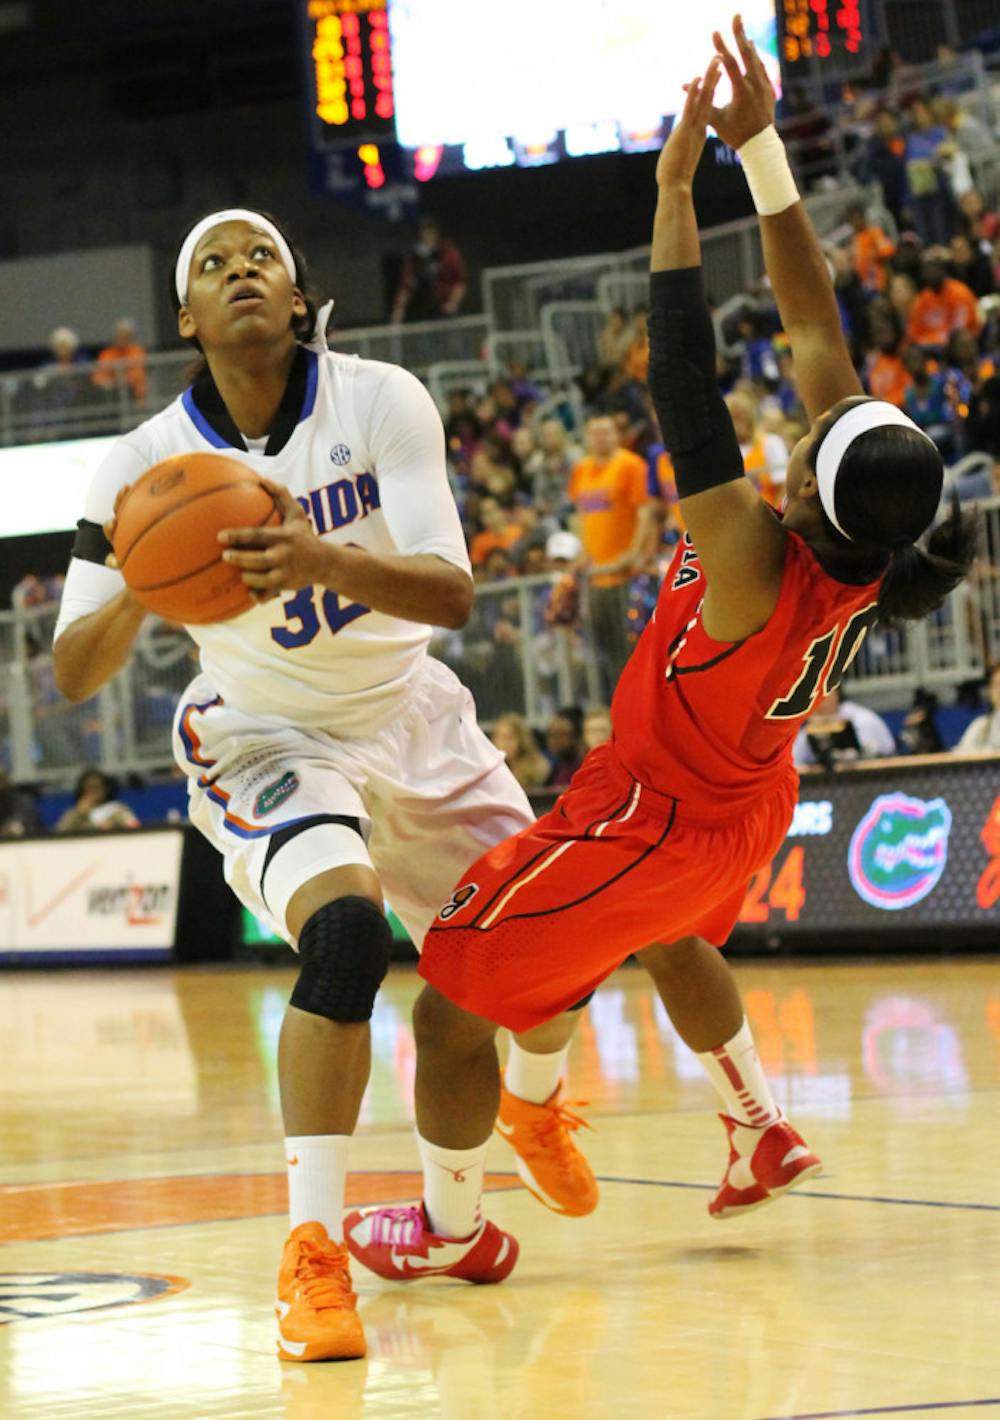 <p>Jennifer George (32) shoots during Florida’s 62-57 loss to Georgia on Sunday in the O’Connell Center. George notched her ninth double-double of the season in Florida's 69-58 win against Arkansas on Thursday.</p>